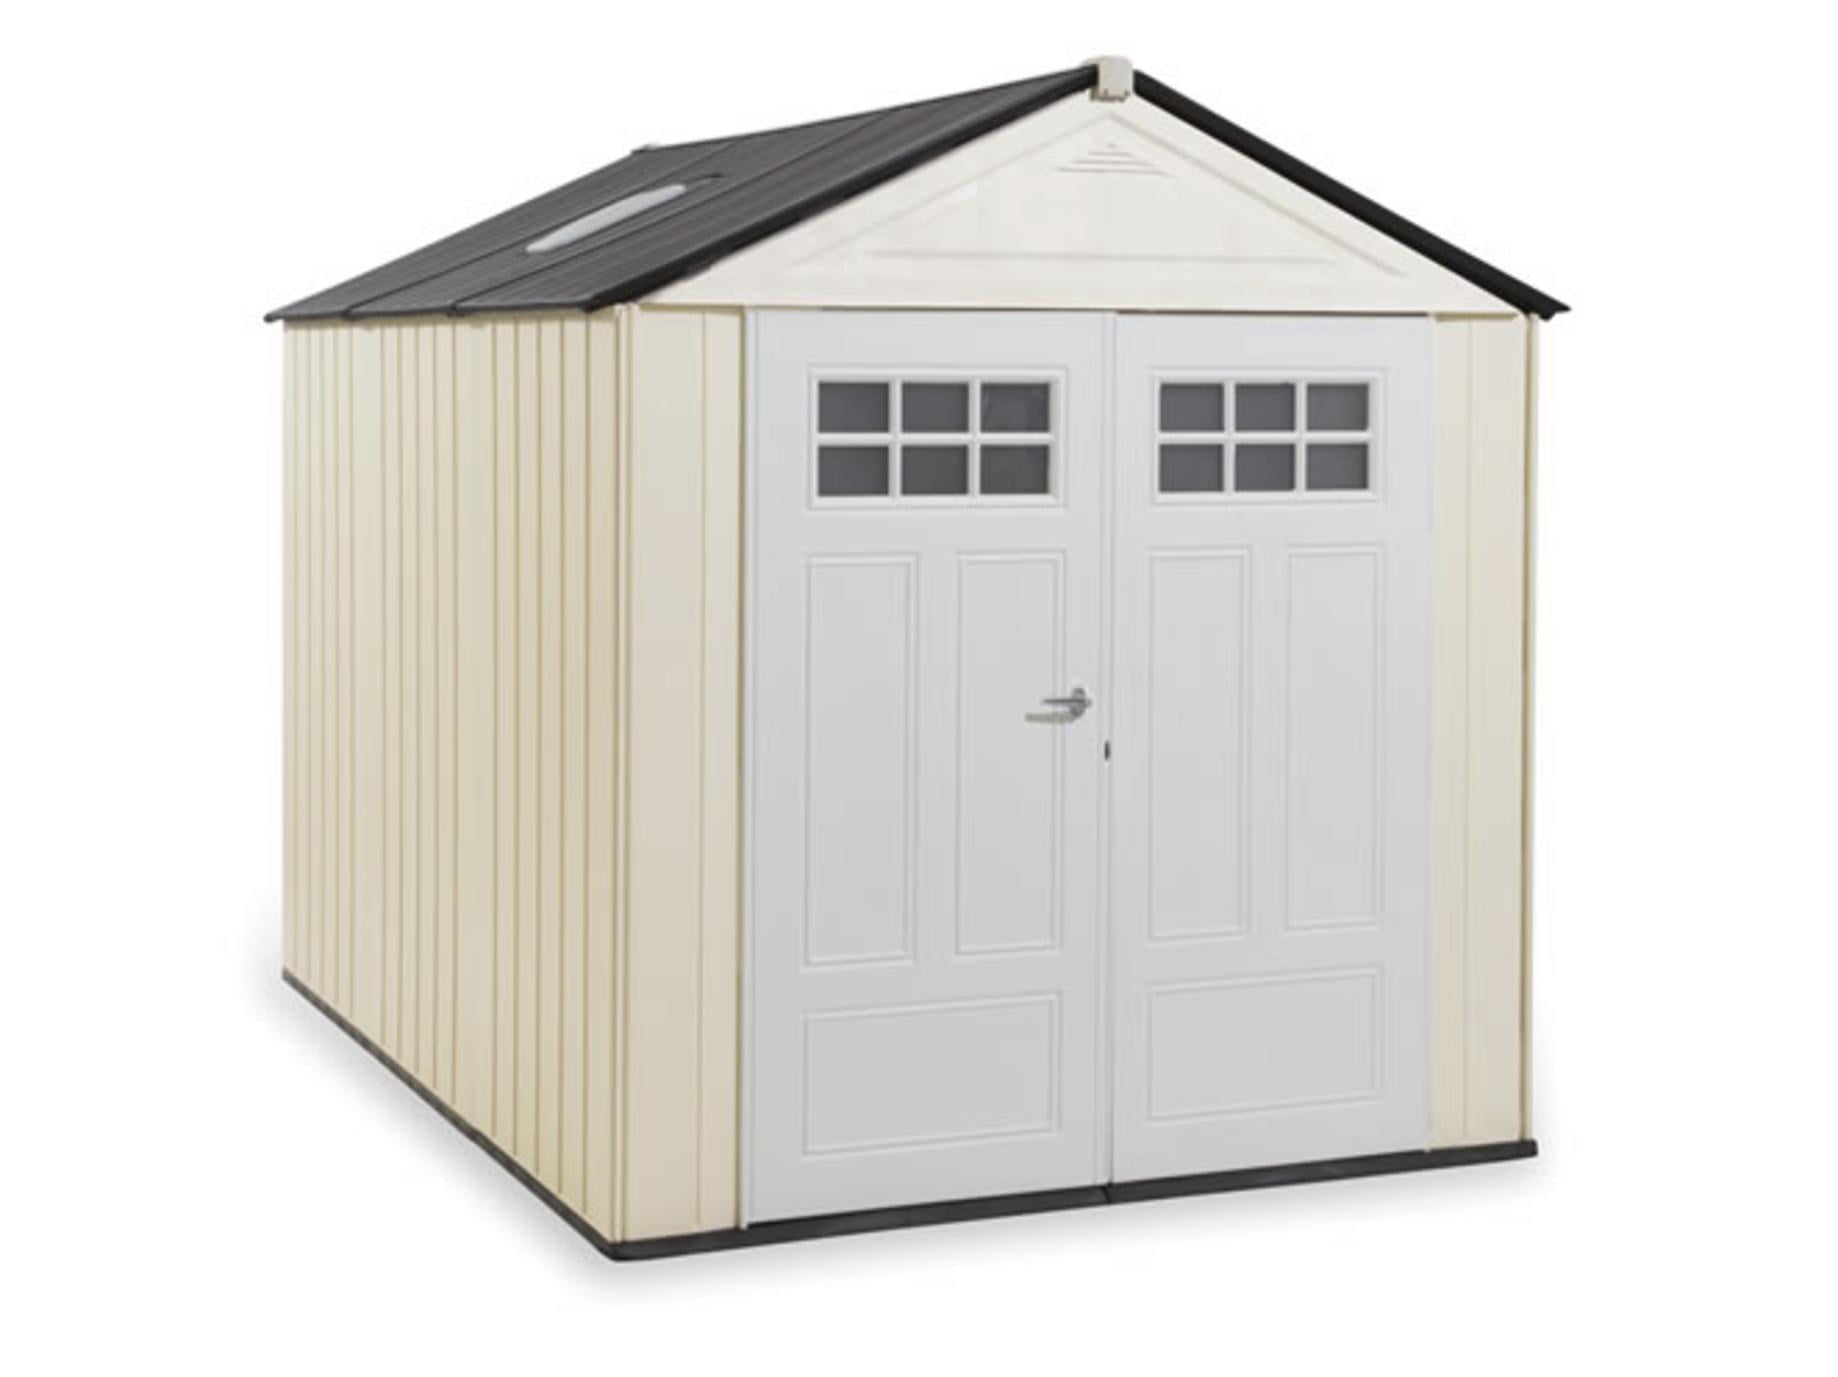 Rubbermaid Outdoor Storage Shed, 10.5x7 ft